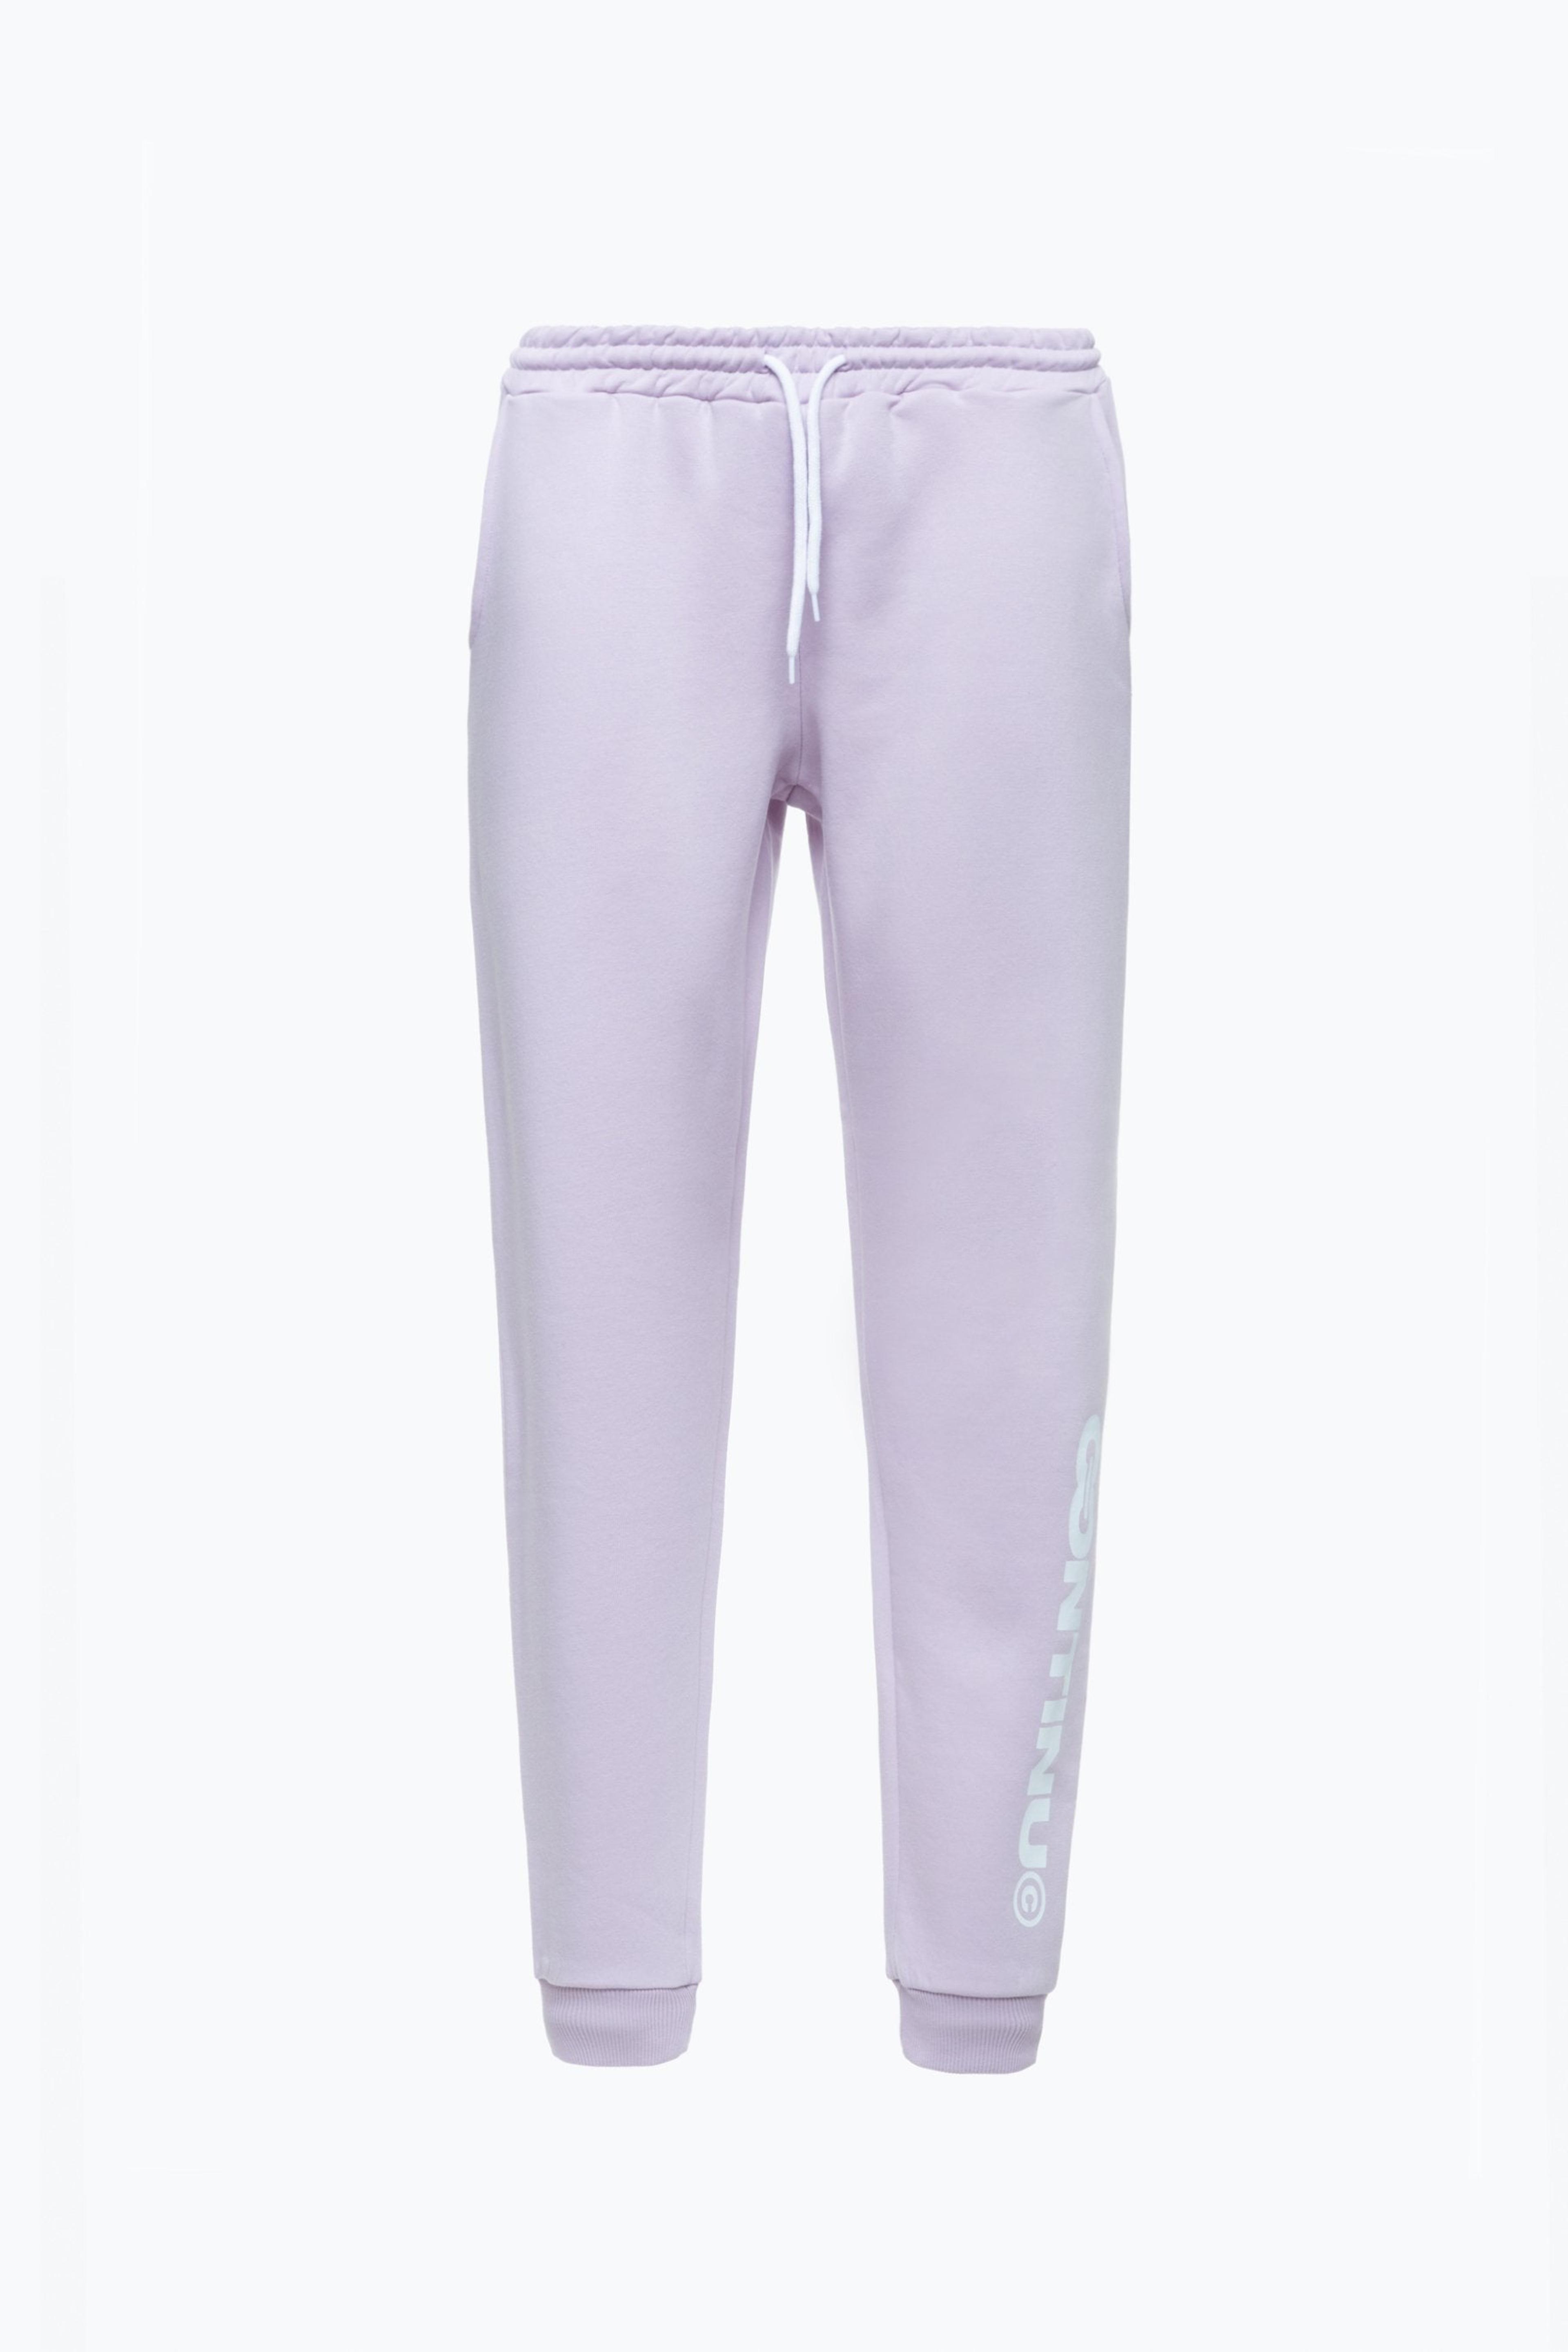 Alternate View 6 of CONTINU8 LILAC JOGGERS